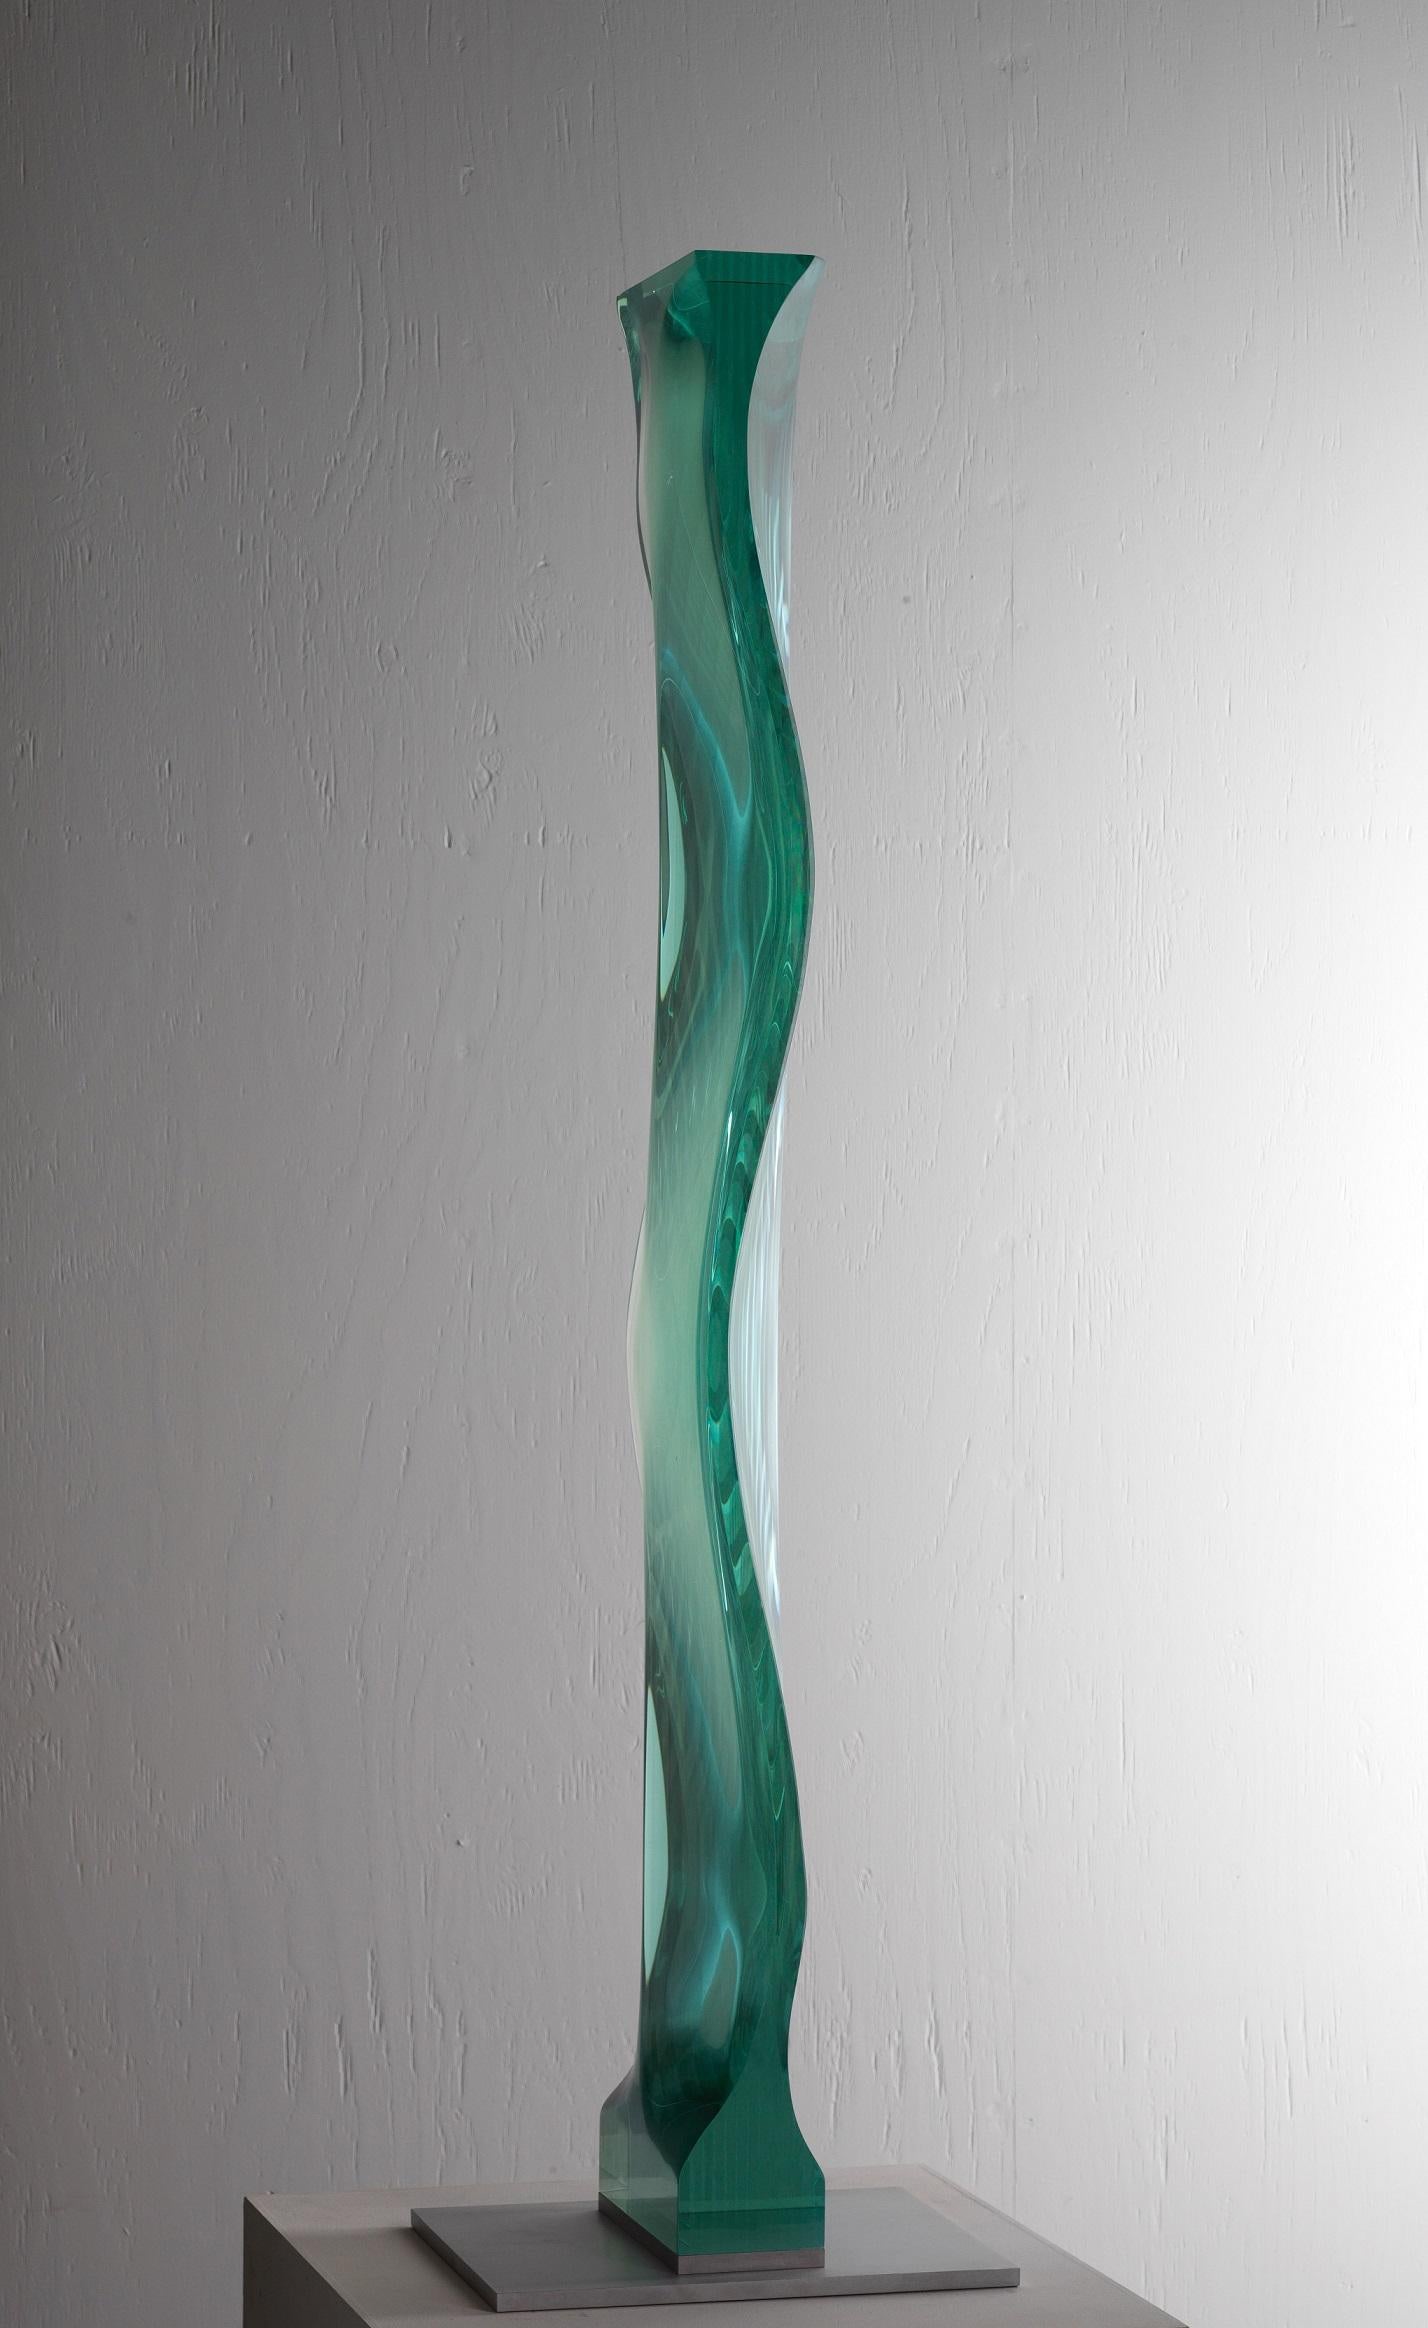 M.080601 by Toshio Iezumi - Contemporary glass sculpture, green, abstract, long For Sale 1